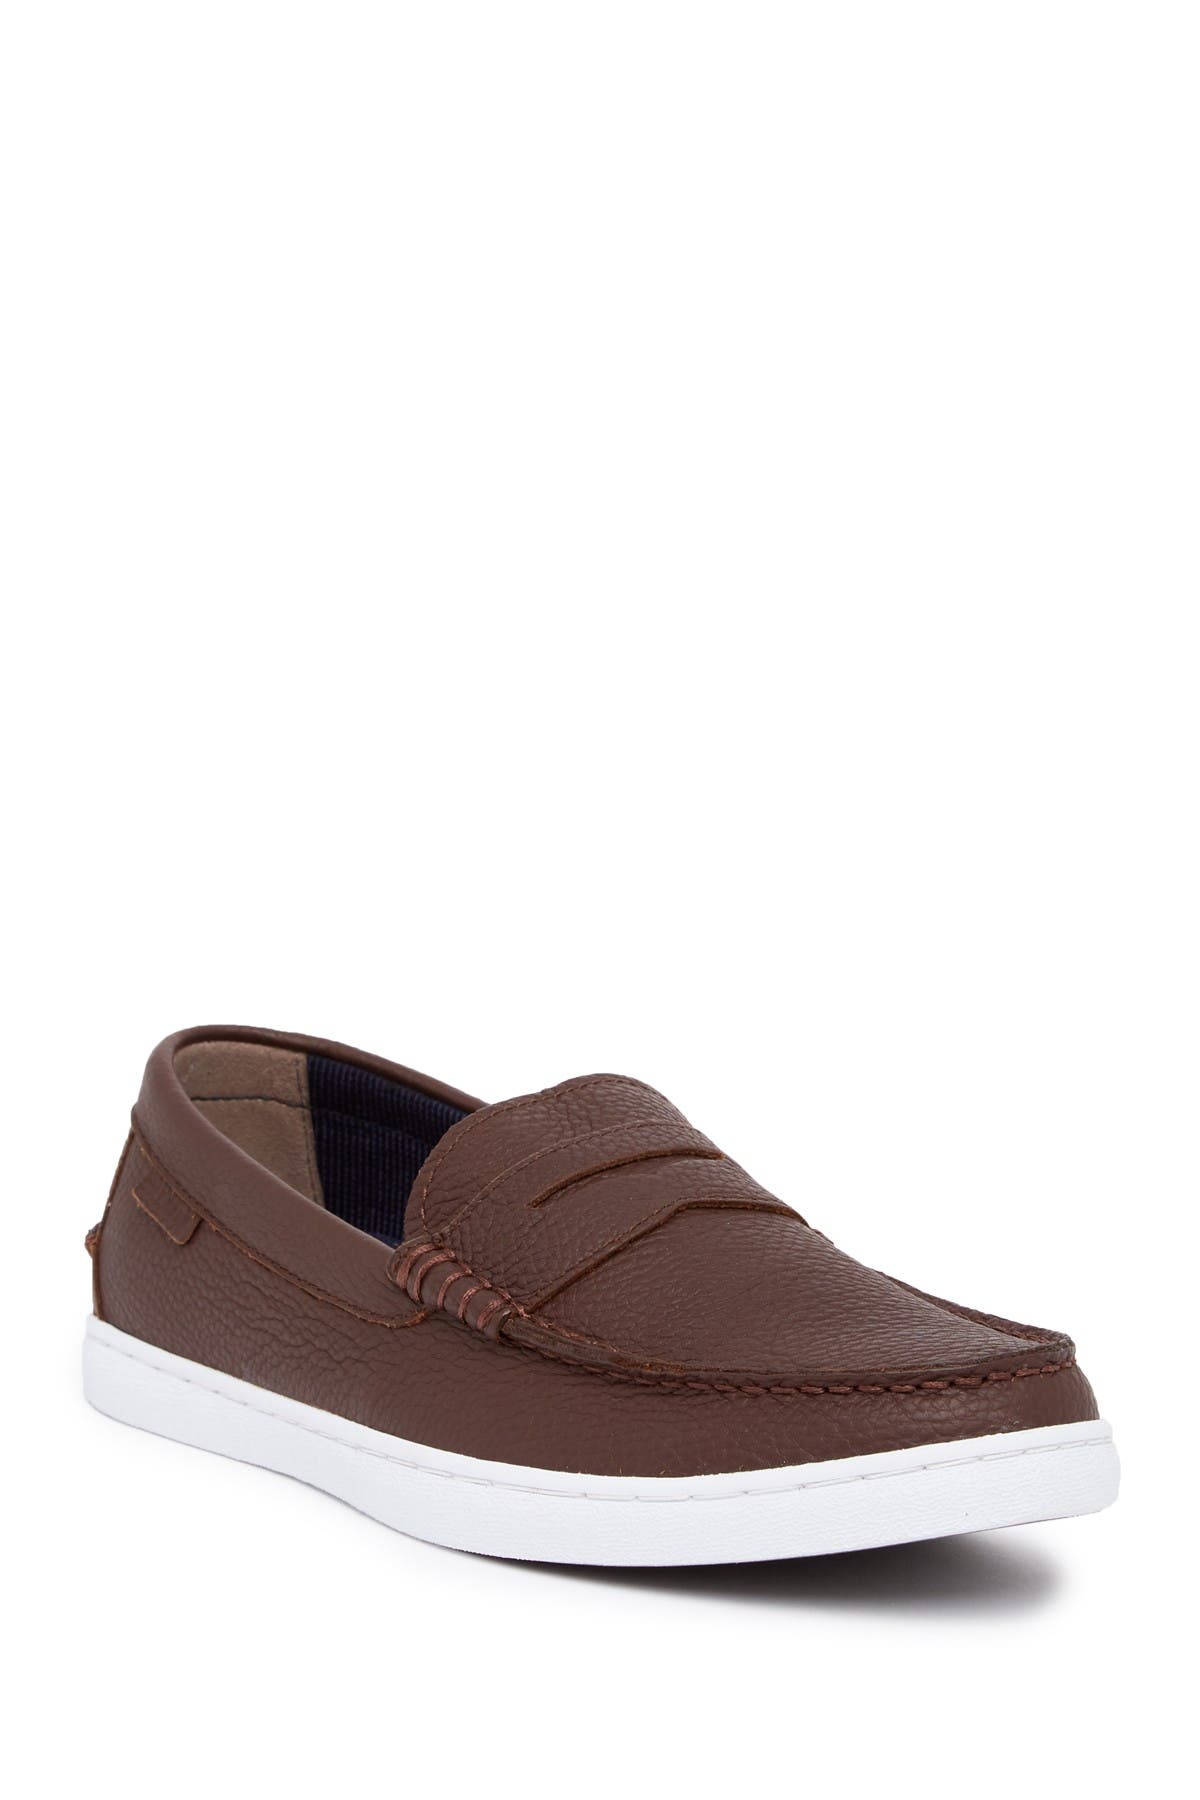 cole haan two tone loafers